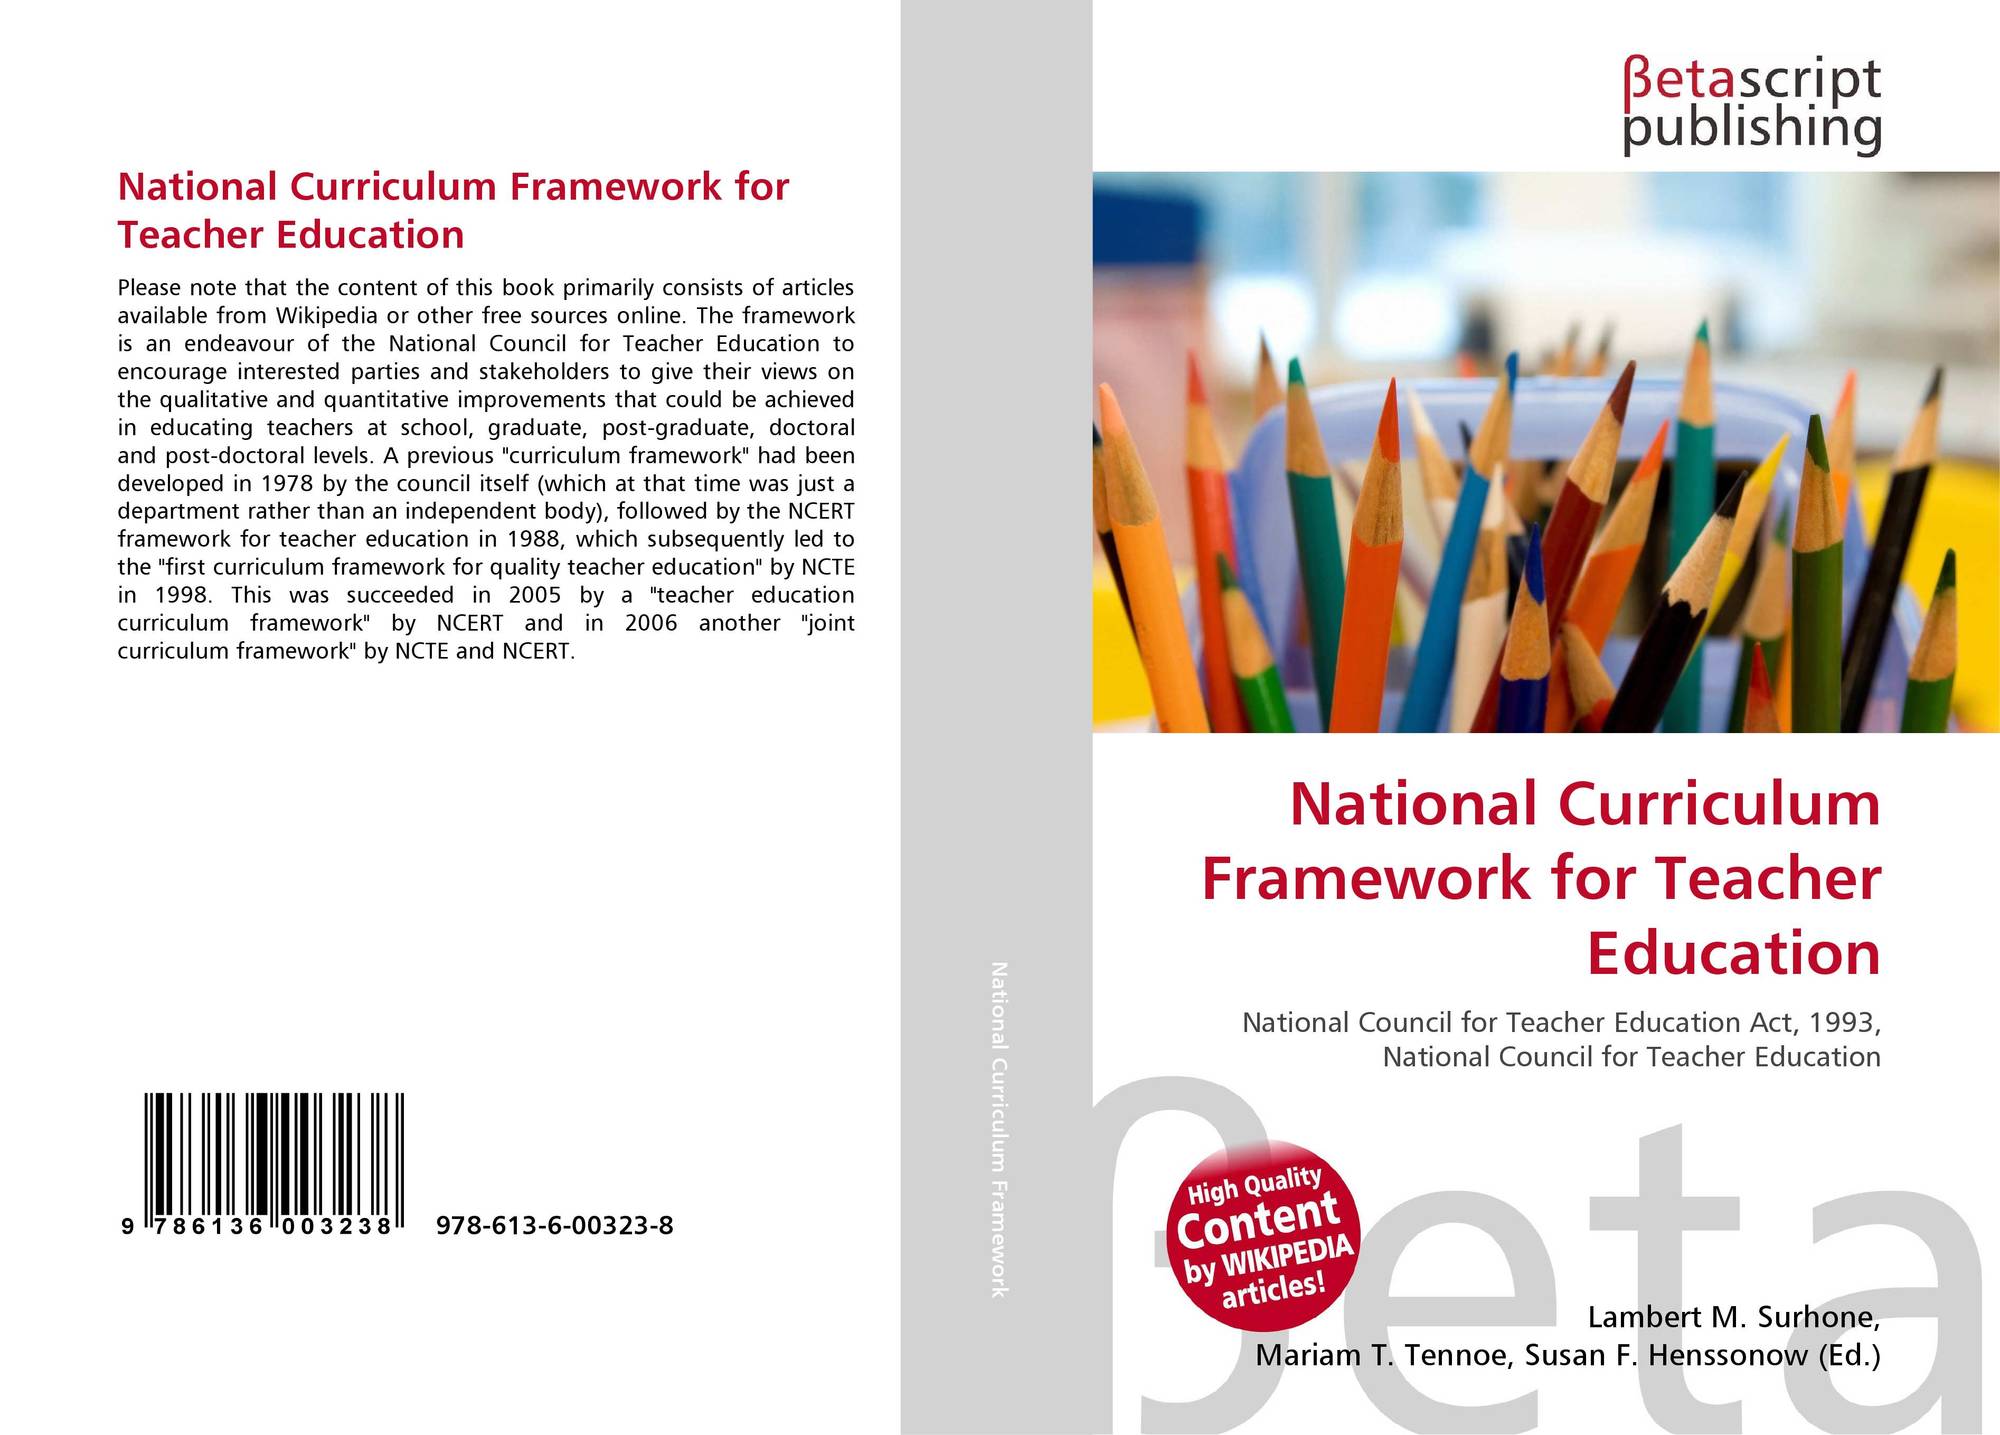 Education And The National Curriculum Framework